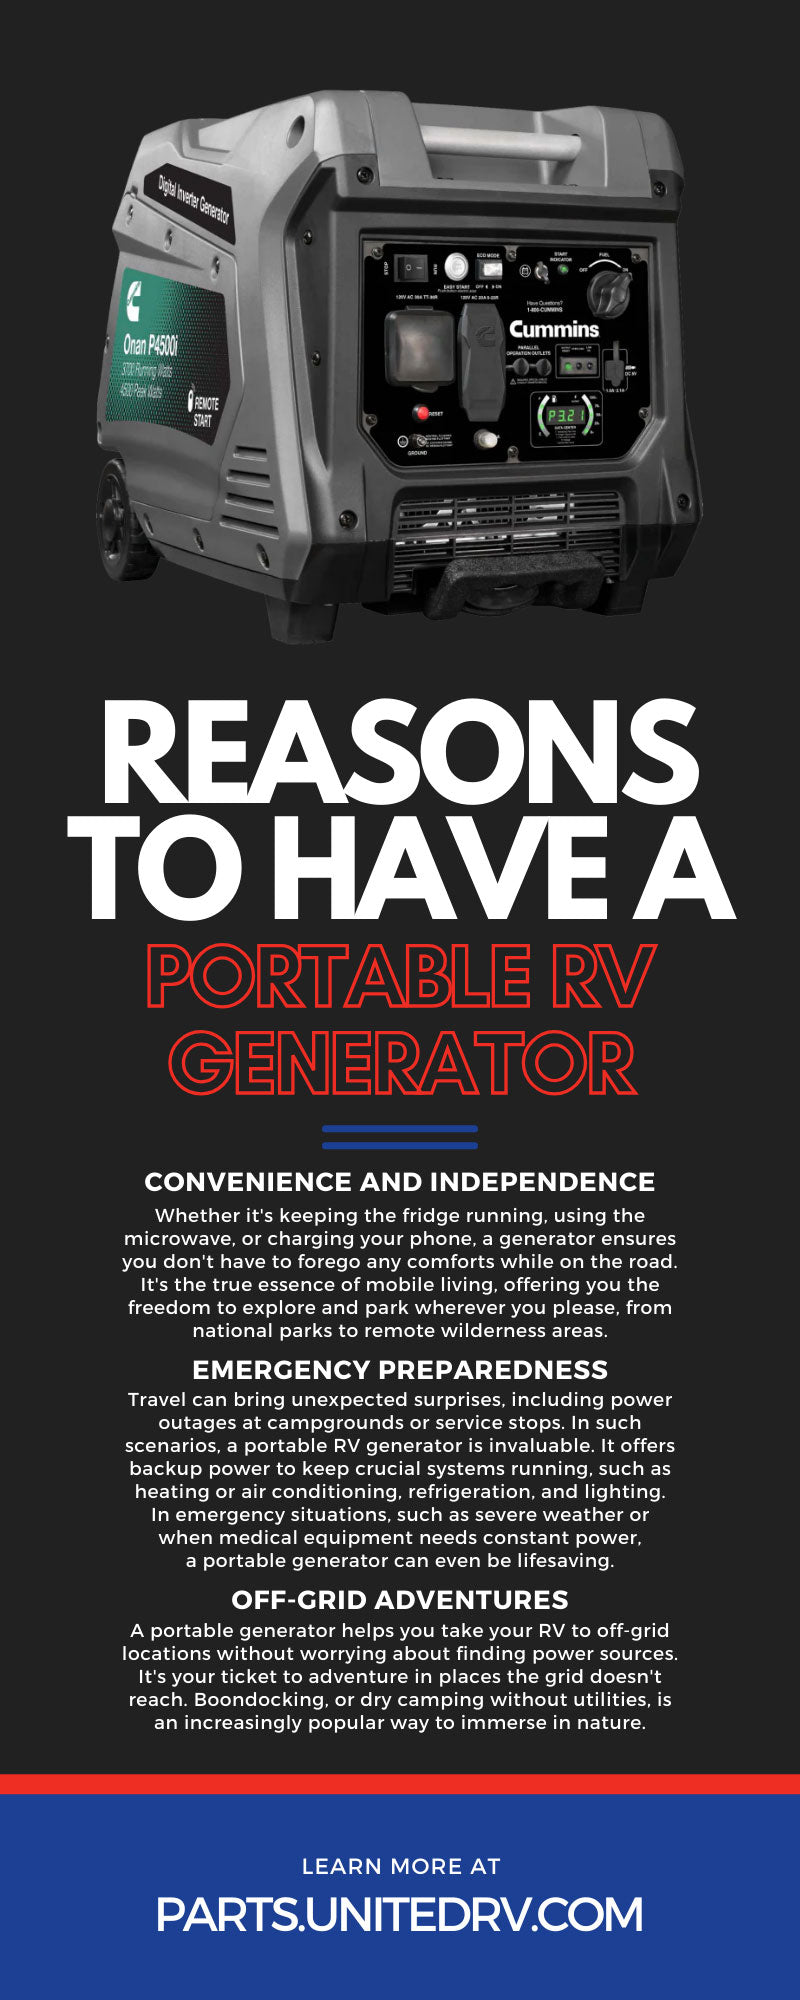 9 Reasons To Have a Portable RV Generator